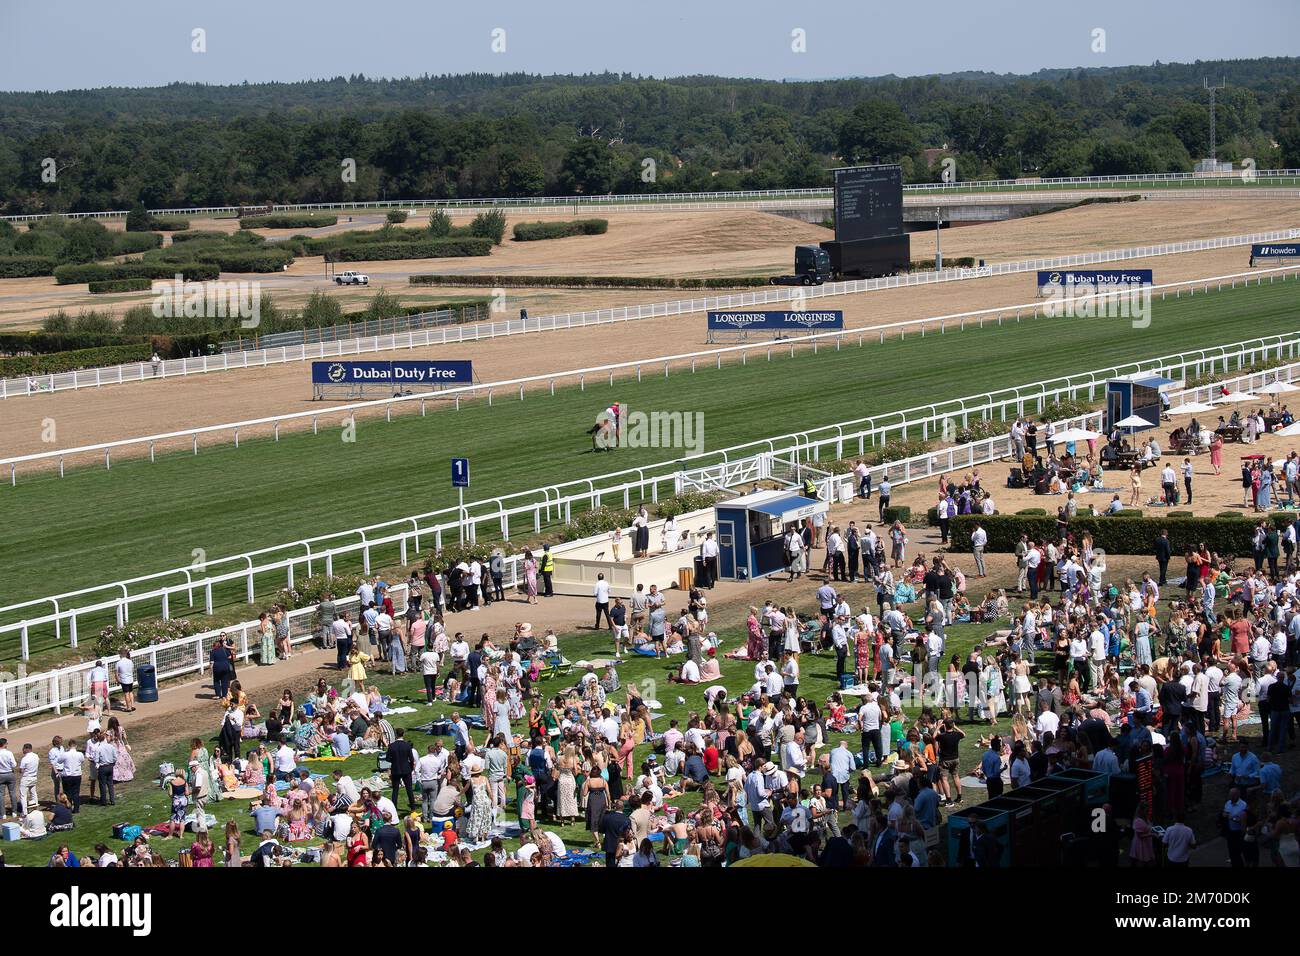 Ascot, Berkshire, UK. 6th August, 2022. A busy day of horse racing at the Dubai Duty Free Shergar Cup at Ascot Racecourse. Credit: Maureen McLean/Alamy Stock Photo